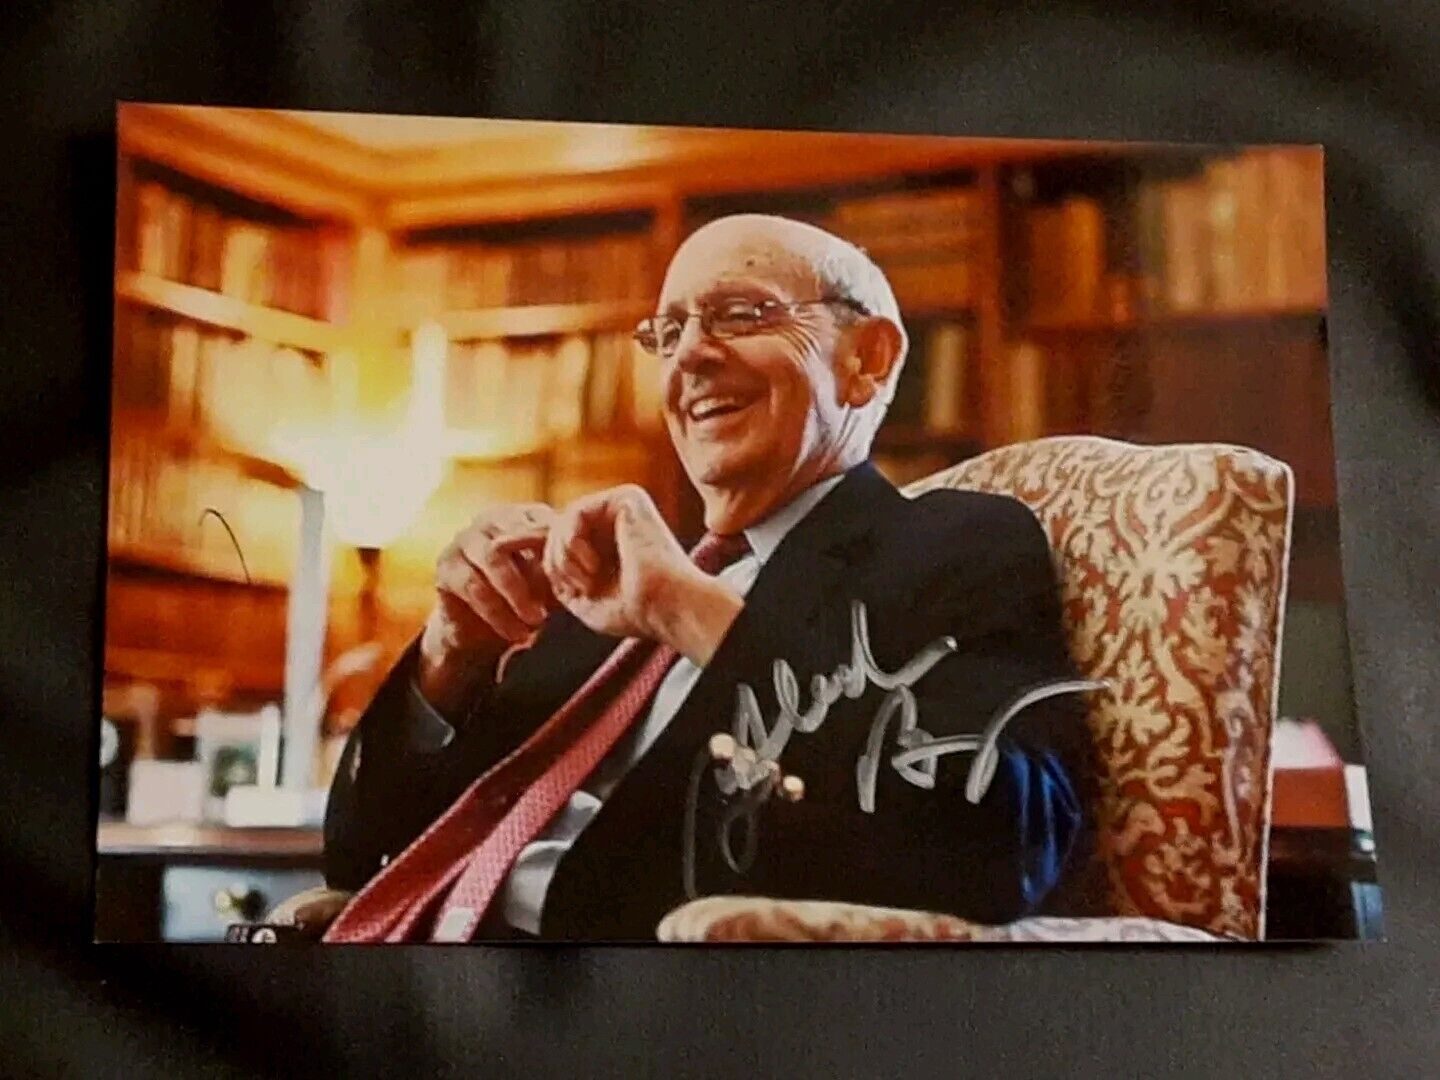 STEPHEN BREYER U.S. SUPREME COURT JUSTICE AUTOGRAPHED SIGNED GLOSSY 4x6 PHOTO